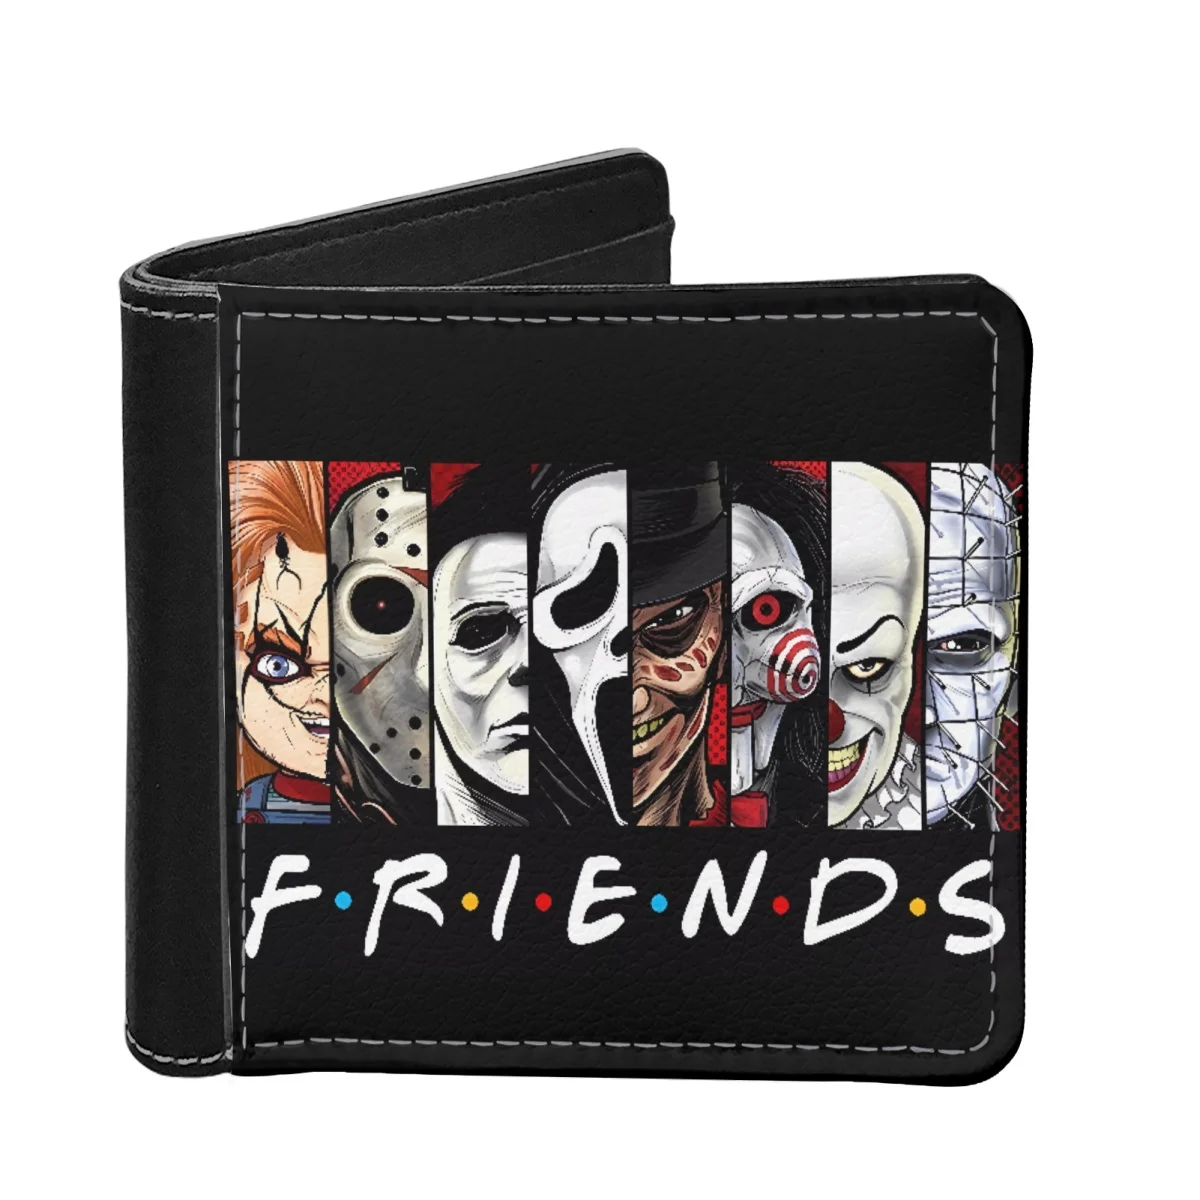 

Men’s Purse Horror Movie Character Wallet for Men Multi-card Slot Coin Money Custom Wallets and Card Holders Carteira Masculina